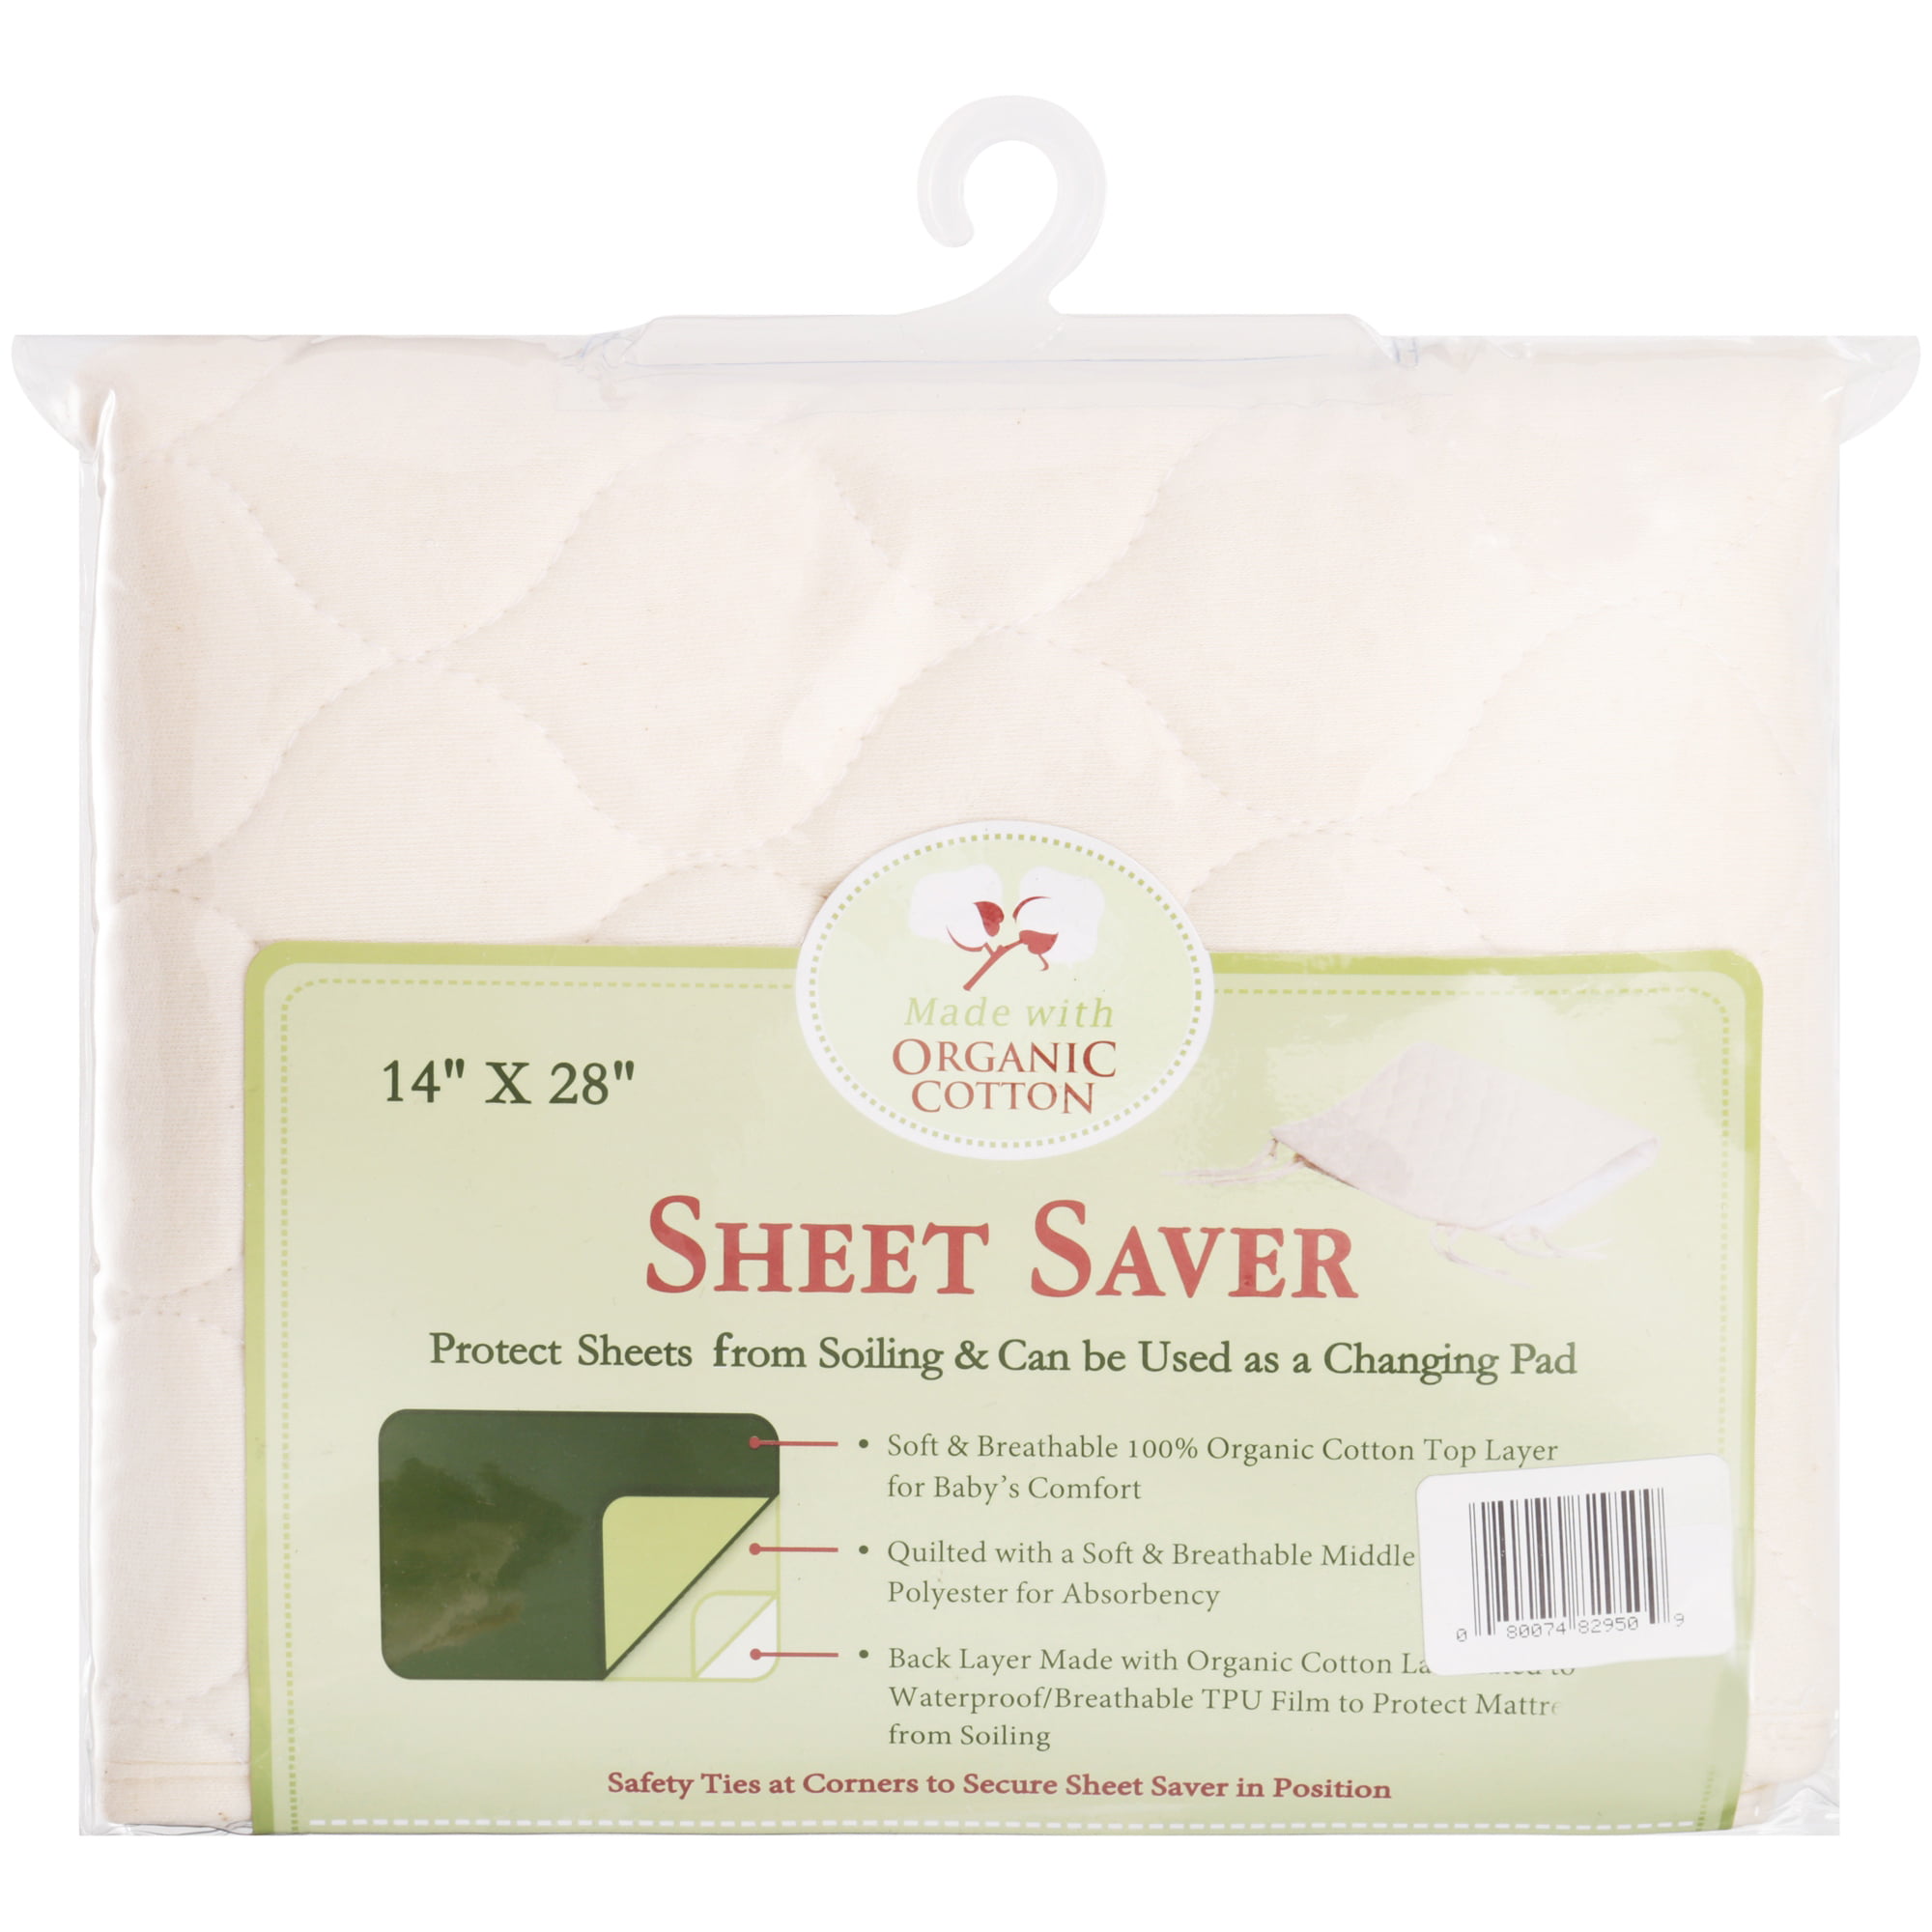 TL Care Waterproof Quilted Fitted Crib Mattress Cover Made with Organic  Cotton Top Layer - Natural